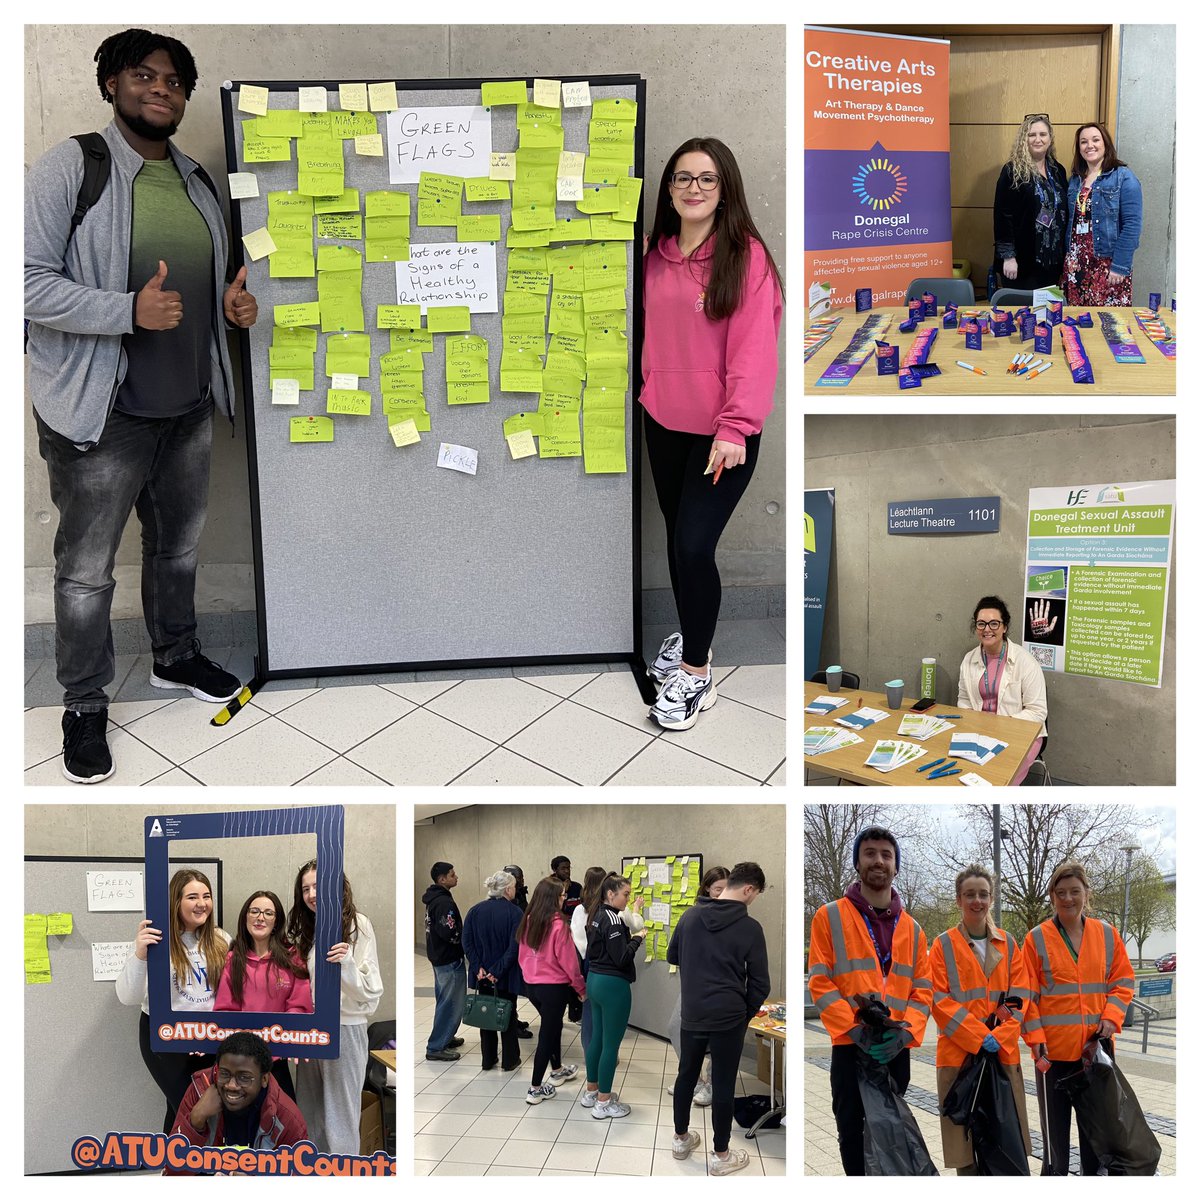 Day 4 Healthy Campus  @ATUDonegal_ & it’s all things Consent #OMFG Green Flag ✅ Healthy Relationships & Campus Clean up 
@atu_ie @HealthyCampusIE @ActiveConsent @TooIntoYou